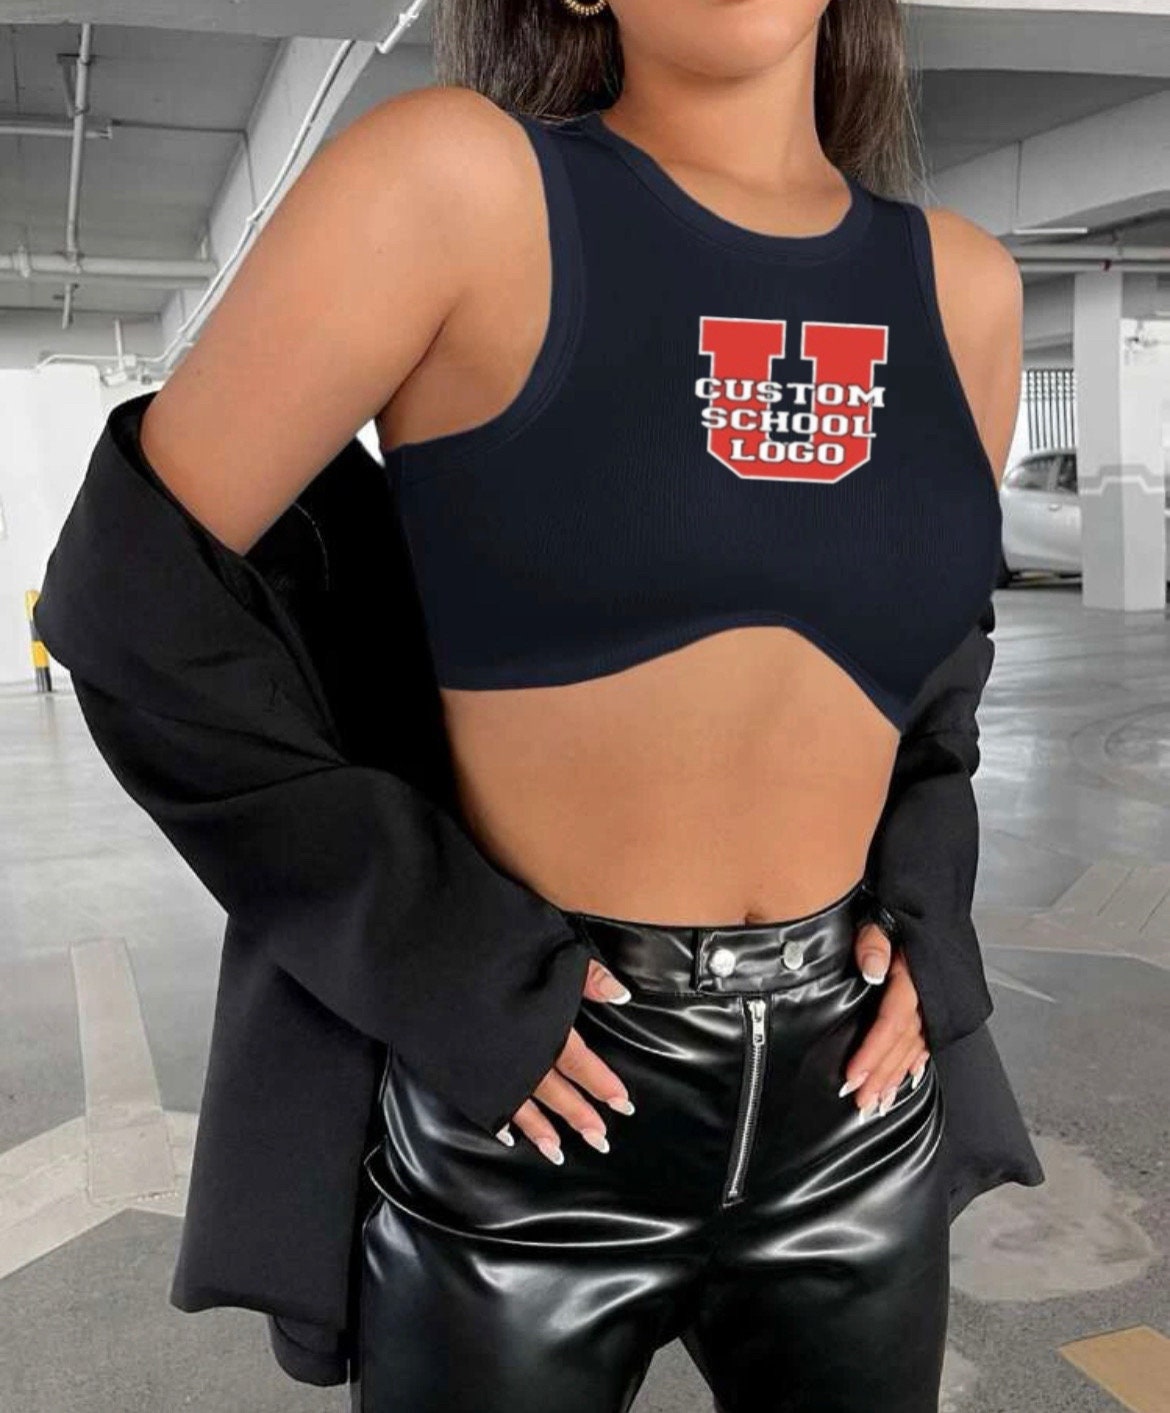 Custom College Apparel Open Back Top, College Apparel, College Merch, Bed  Party, Tail Gate, Game Day, Your School, Team or Company 